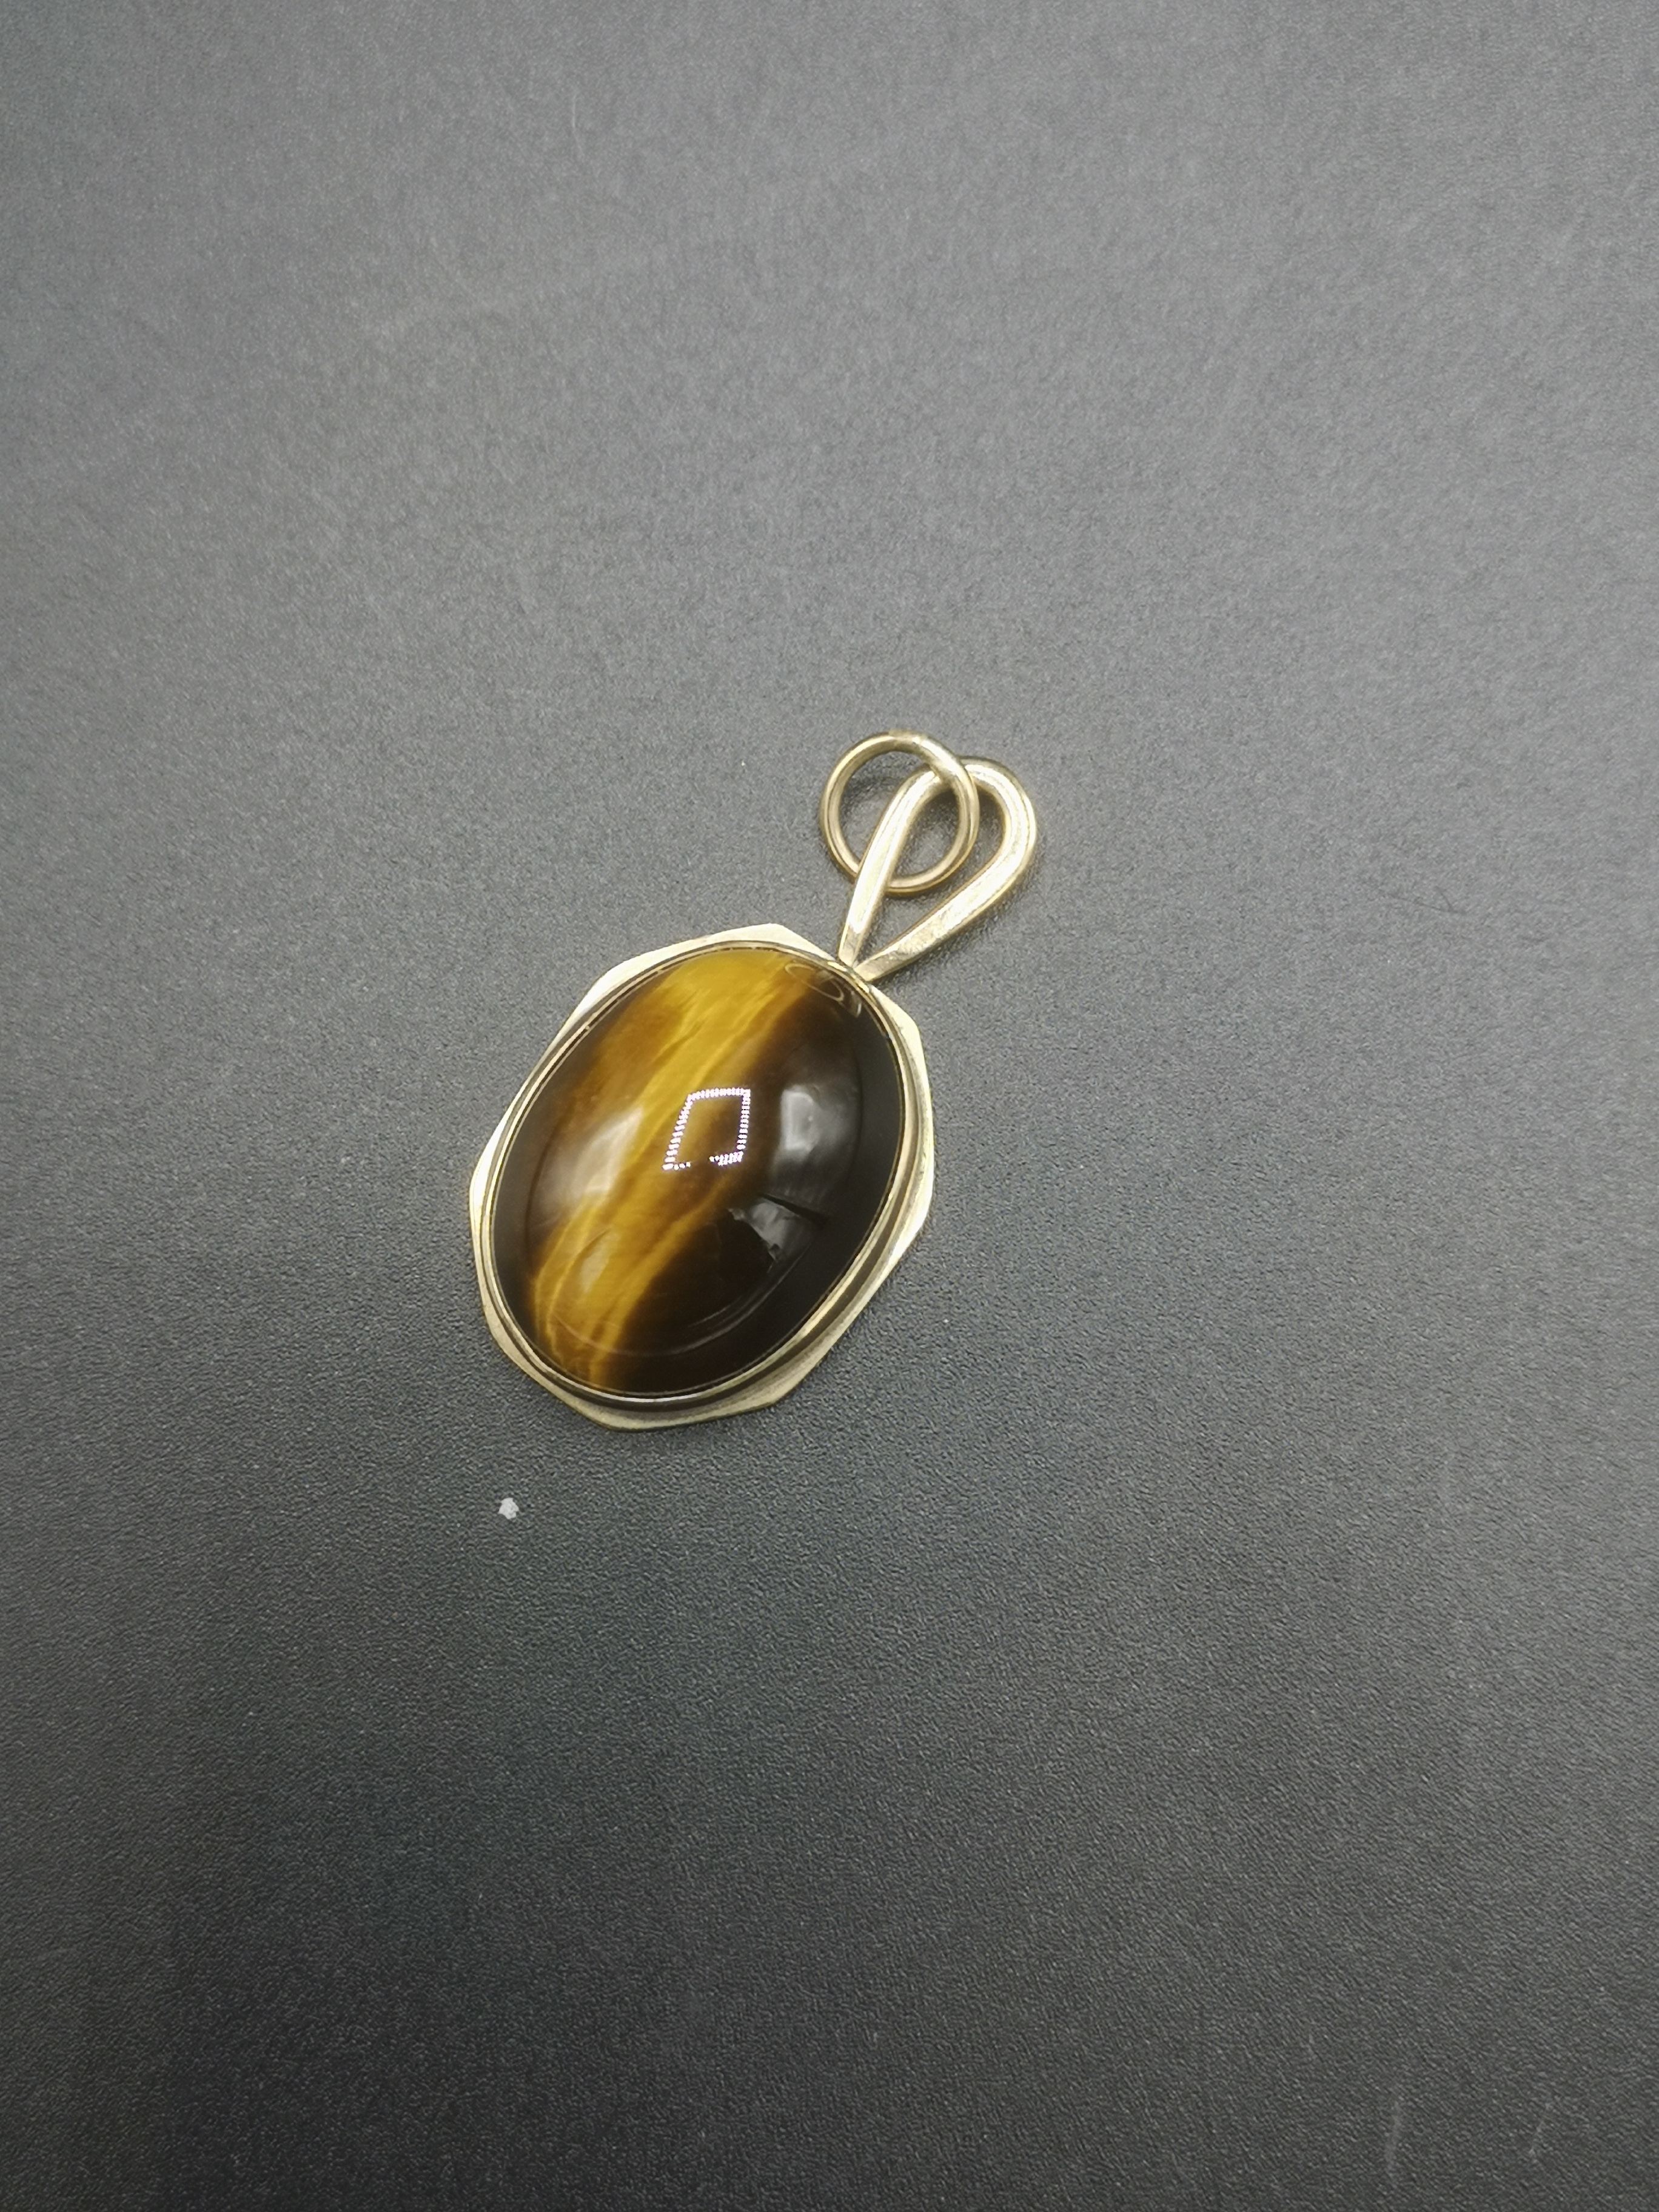 9ct gold pendant set with a tiger's eye